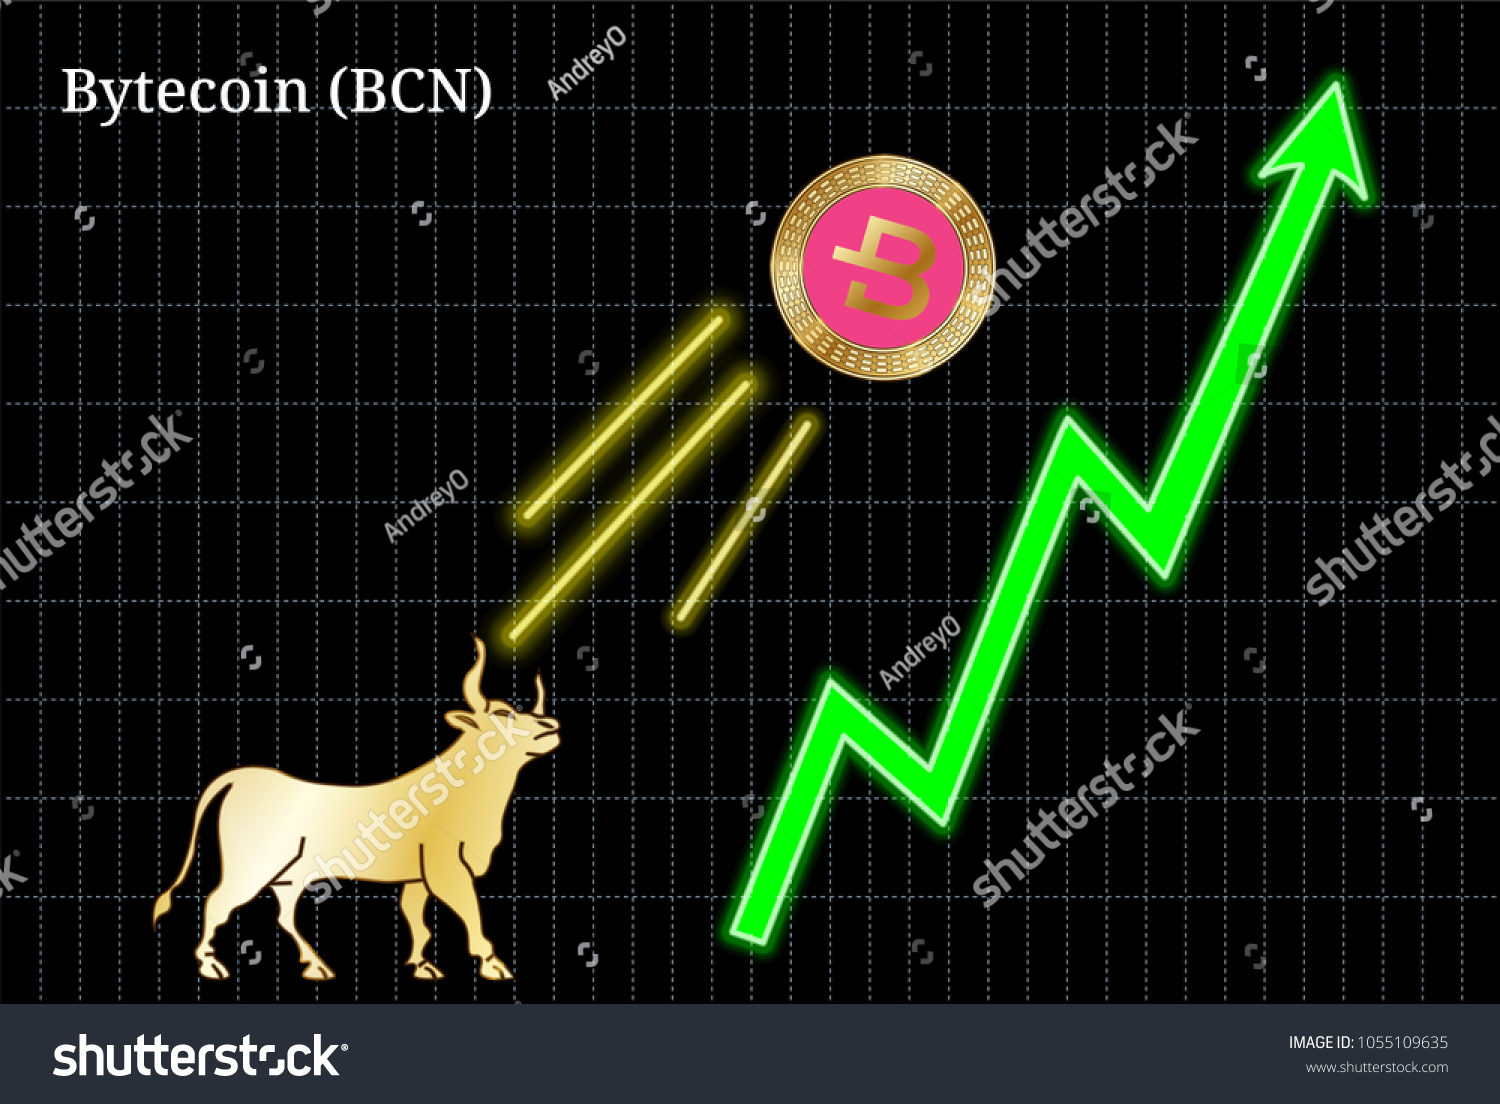 SVG of Gold bull, throwing up Bytecoin (BCN) cryptocurrency golden coin up the trend. Bullish Bytecoin (BCN) chart svg